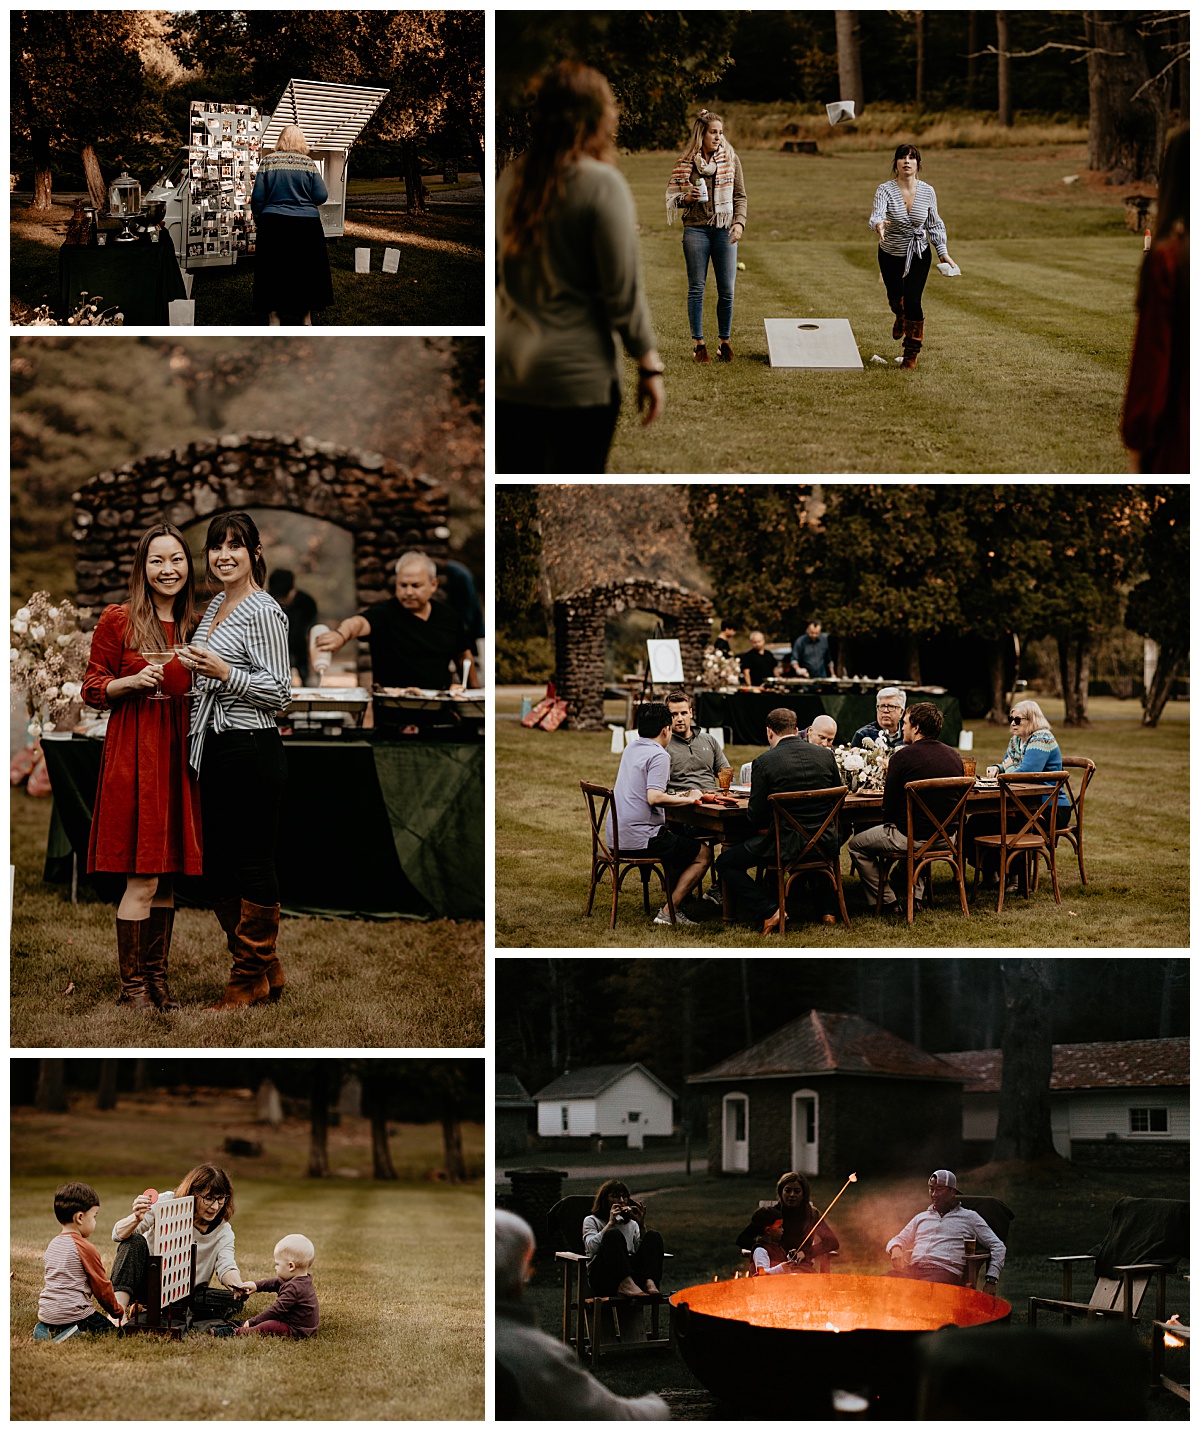 guests enjoy lawn games and roast marshmallows over the fire by New York Wedding Photographer